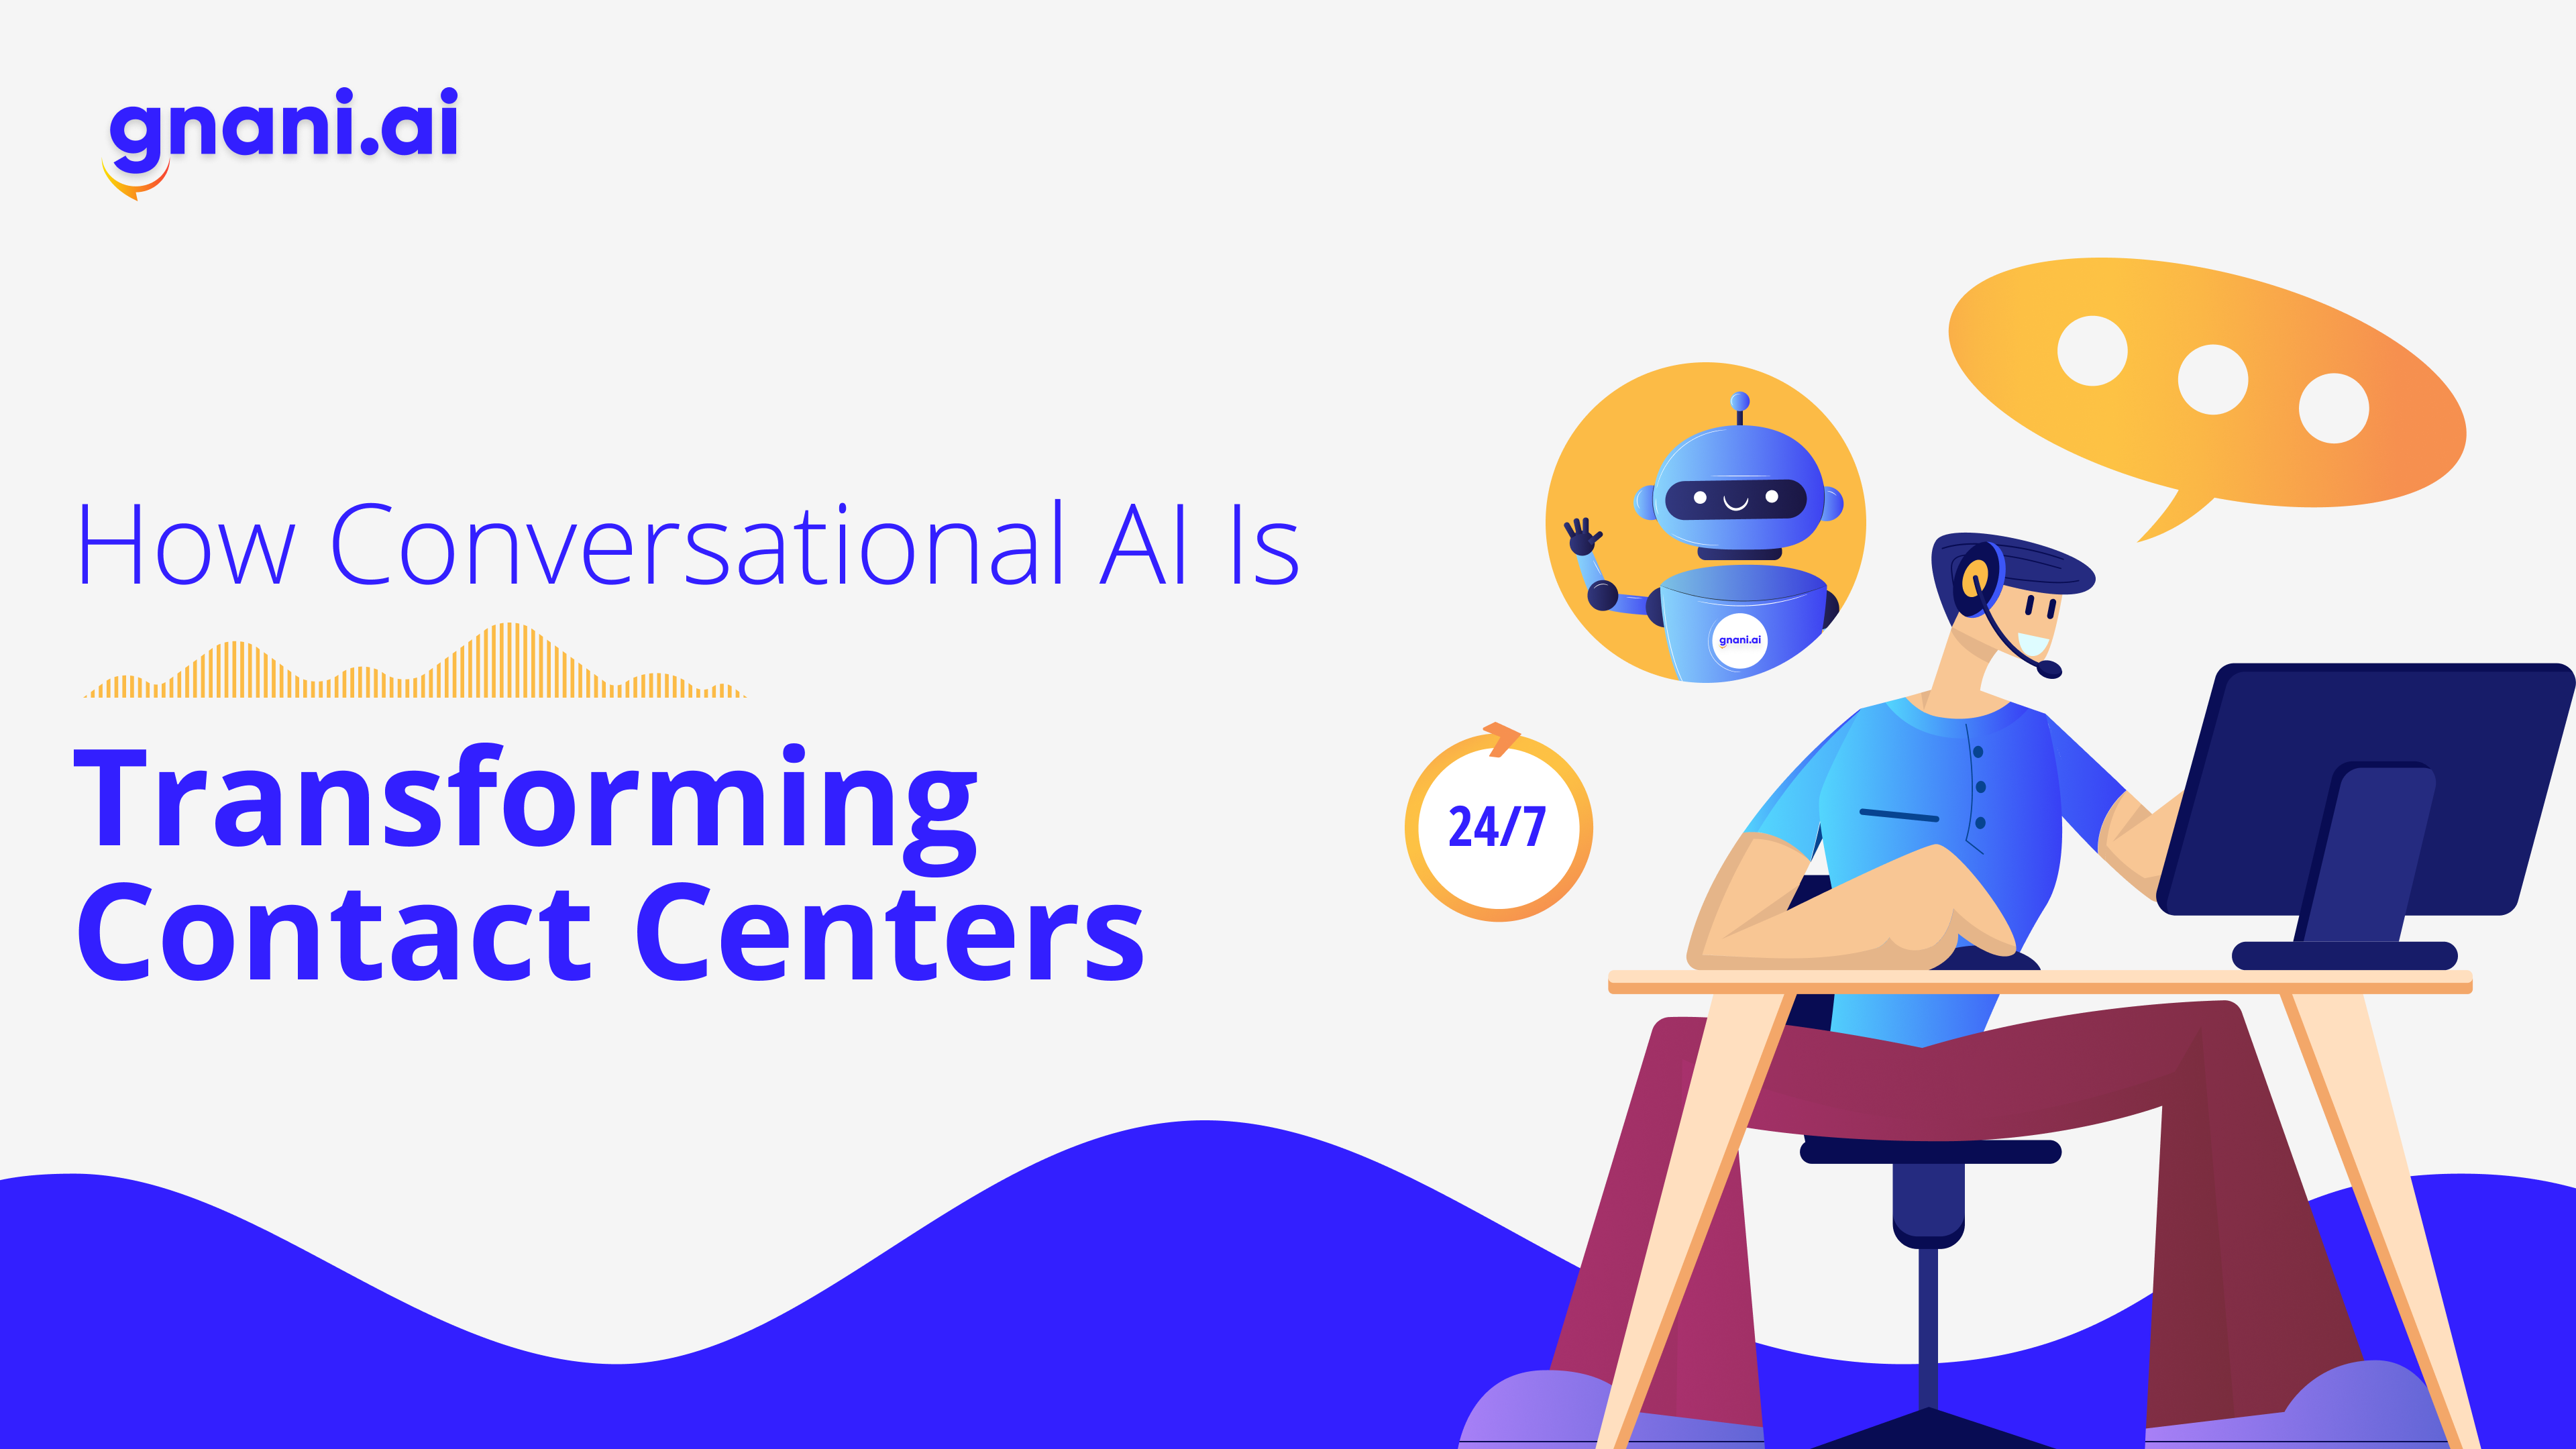 conversational ai in contact centers featured image